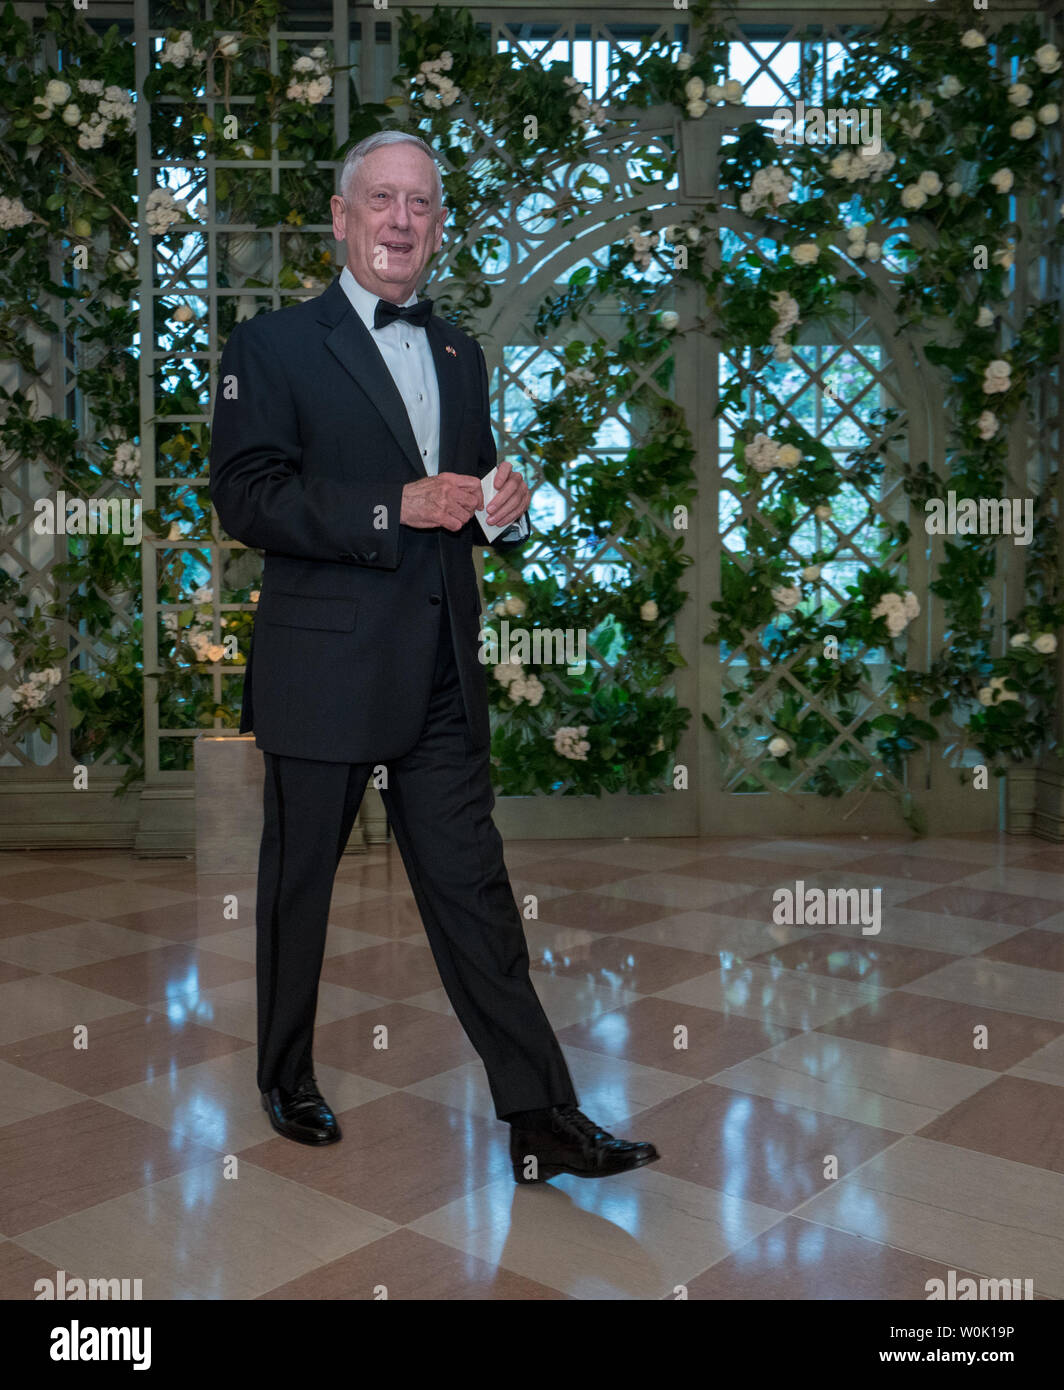 James Mattis, Secretary of Defense, arrives for the State dinner in honor of French President Emmanuel Macron and his wife Brigitte at the White House in Washington, D.C. on April 24, 2018. Macron and Trump met earlier in the day and discussed a range of bilateral issues during Trumps first official state visit with the French president.     Photo by Ken Cedeno/UPI Stock Photo